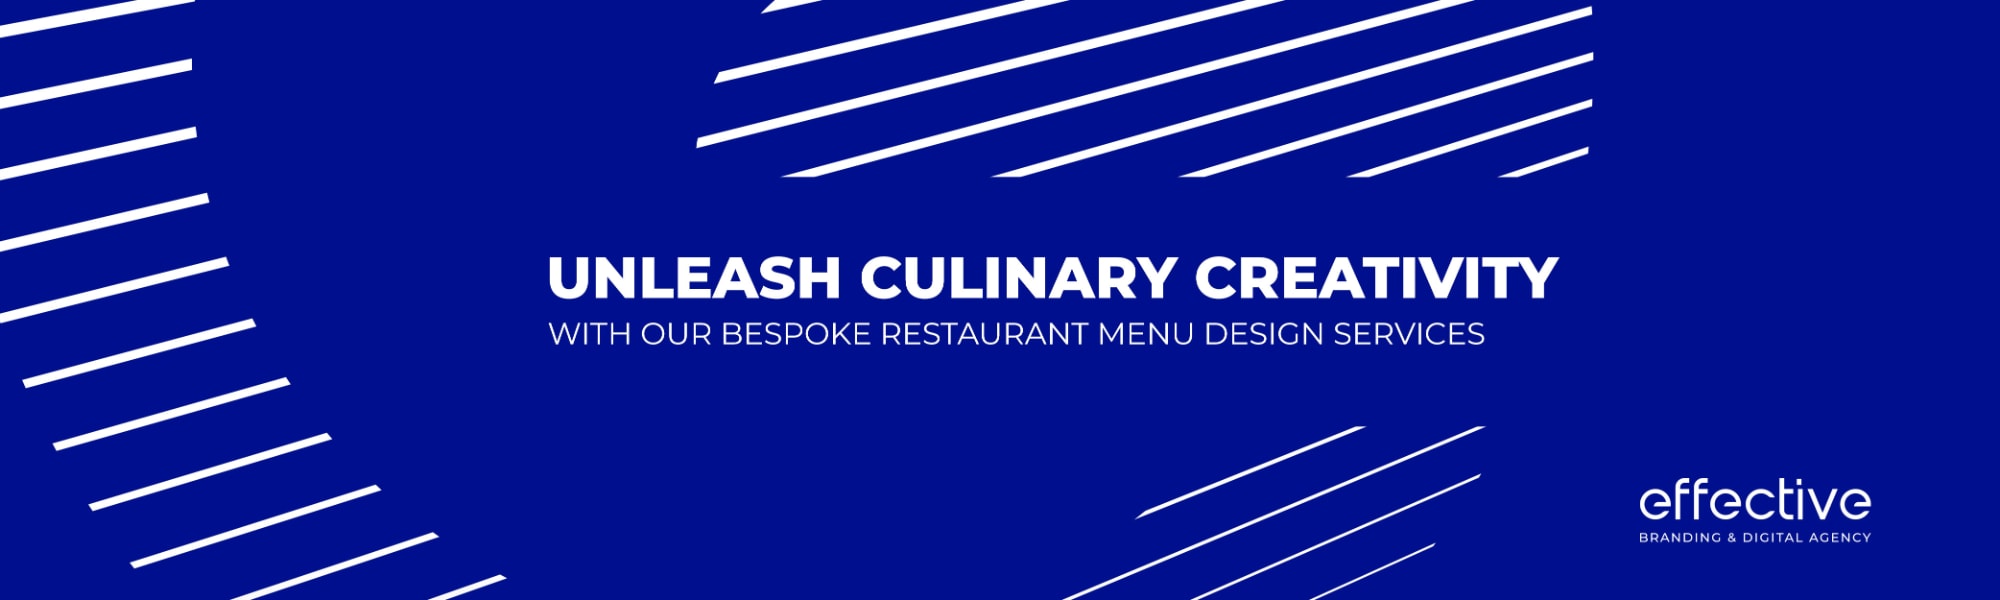 Unleash Culinary Creativity with Our Bespoke Restaurant Menu Design Services